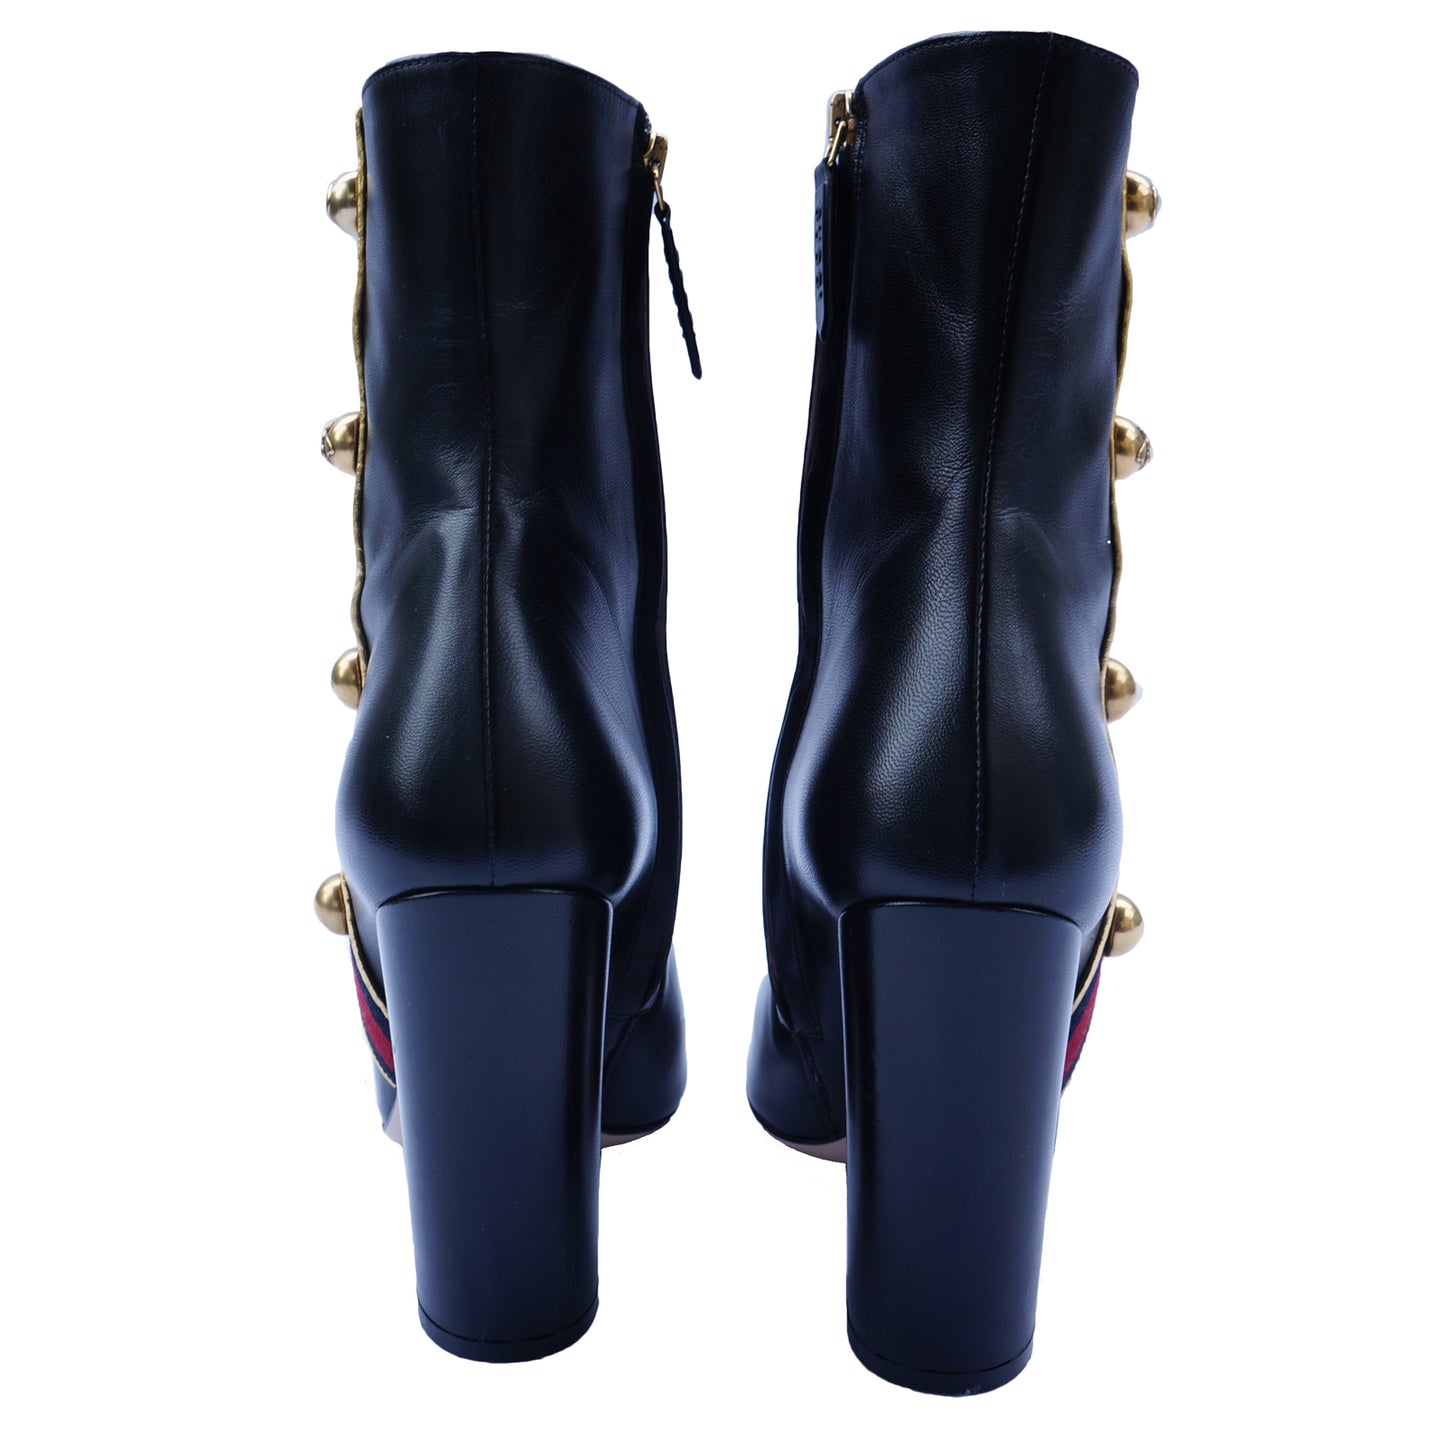 GUCCI CARLY LEATHER STUDDED GROSGRAIN TRIM BOOTS - leefluxury.com